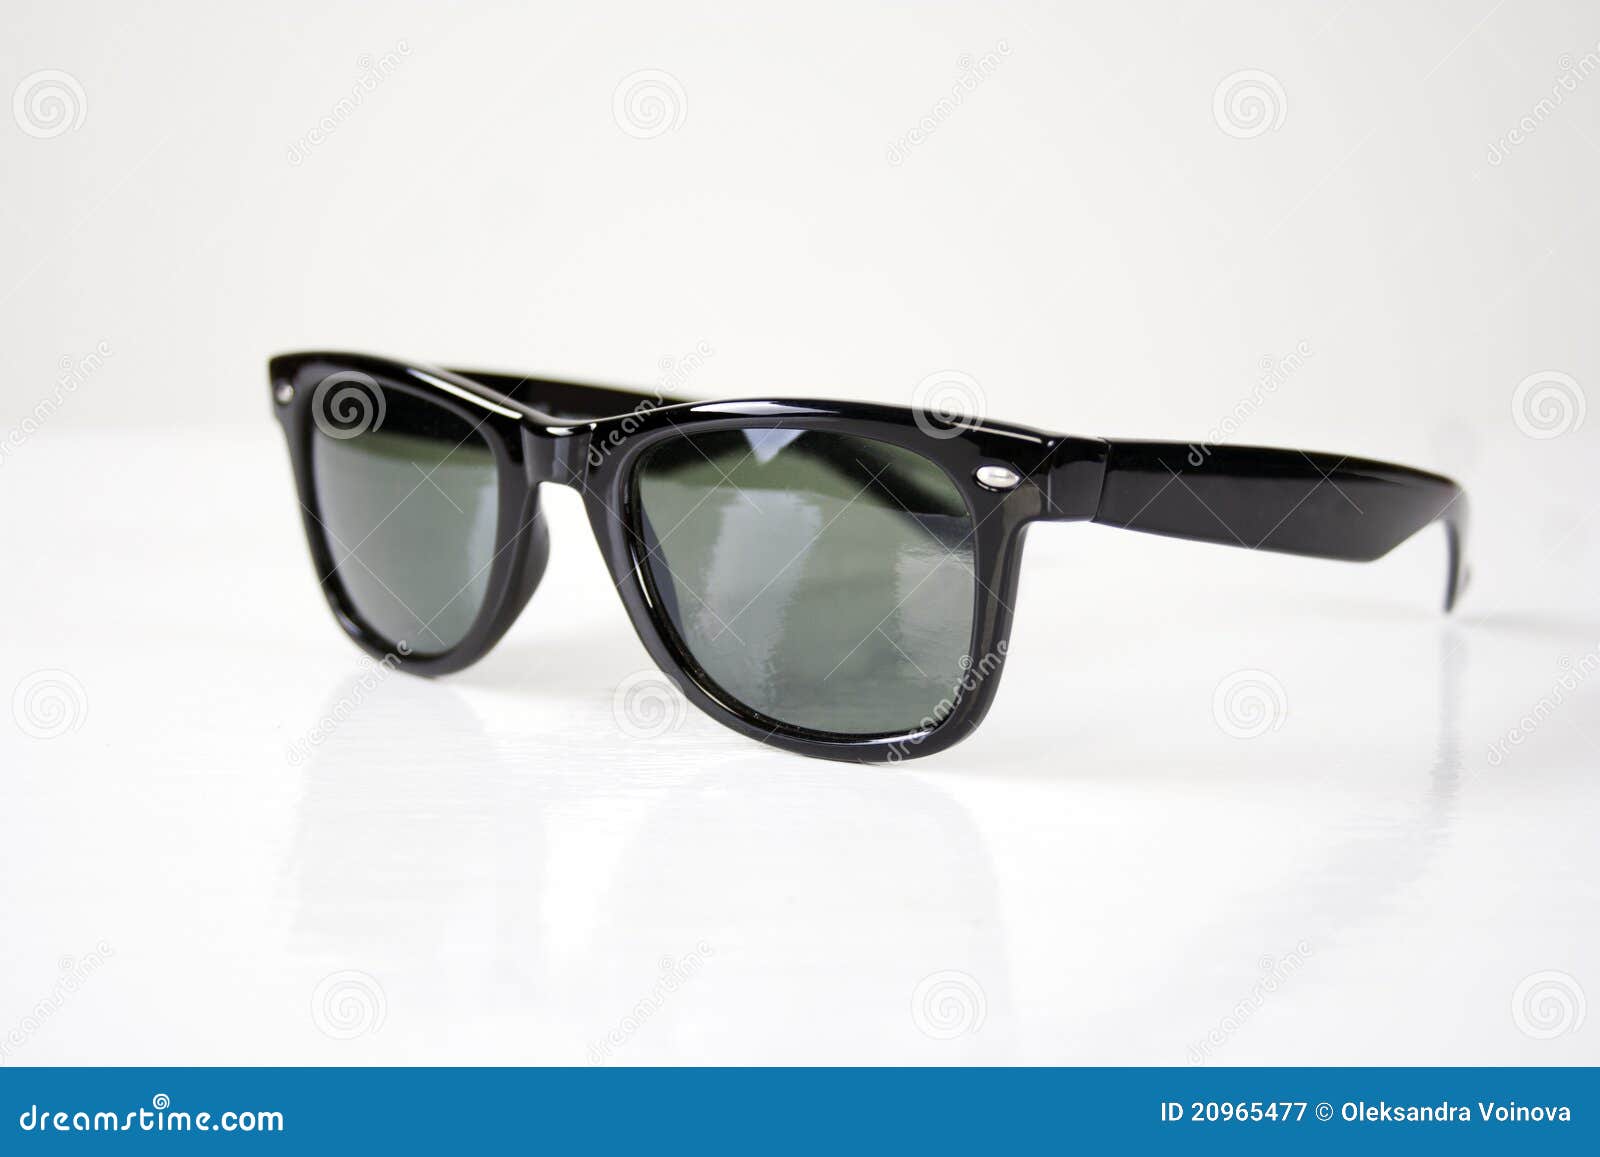 Black shades made by ak47 with 500 zombies